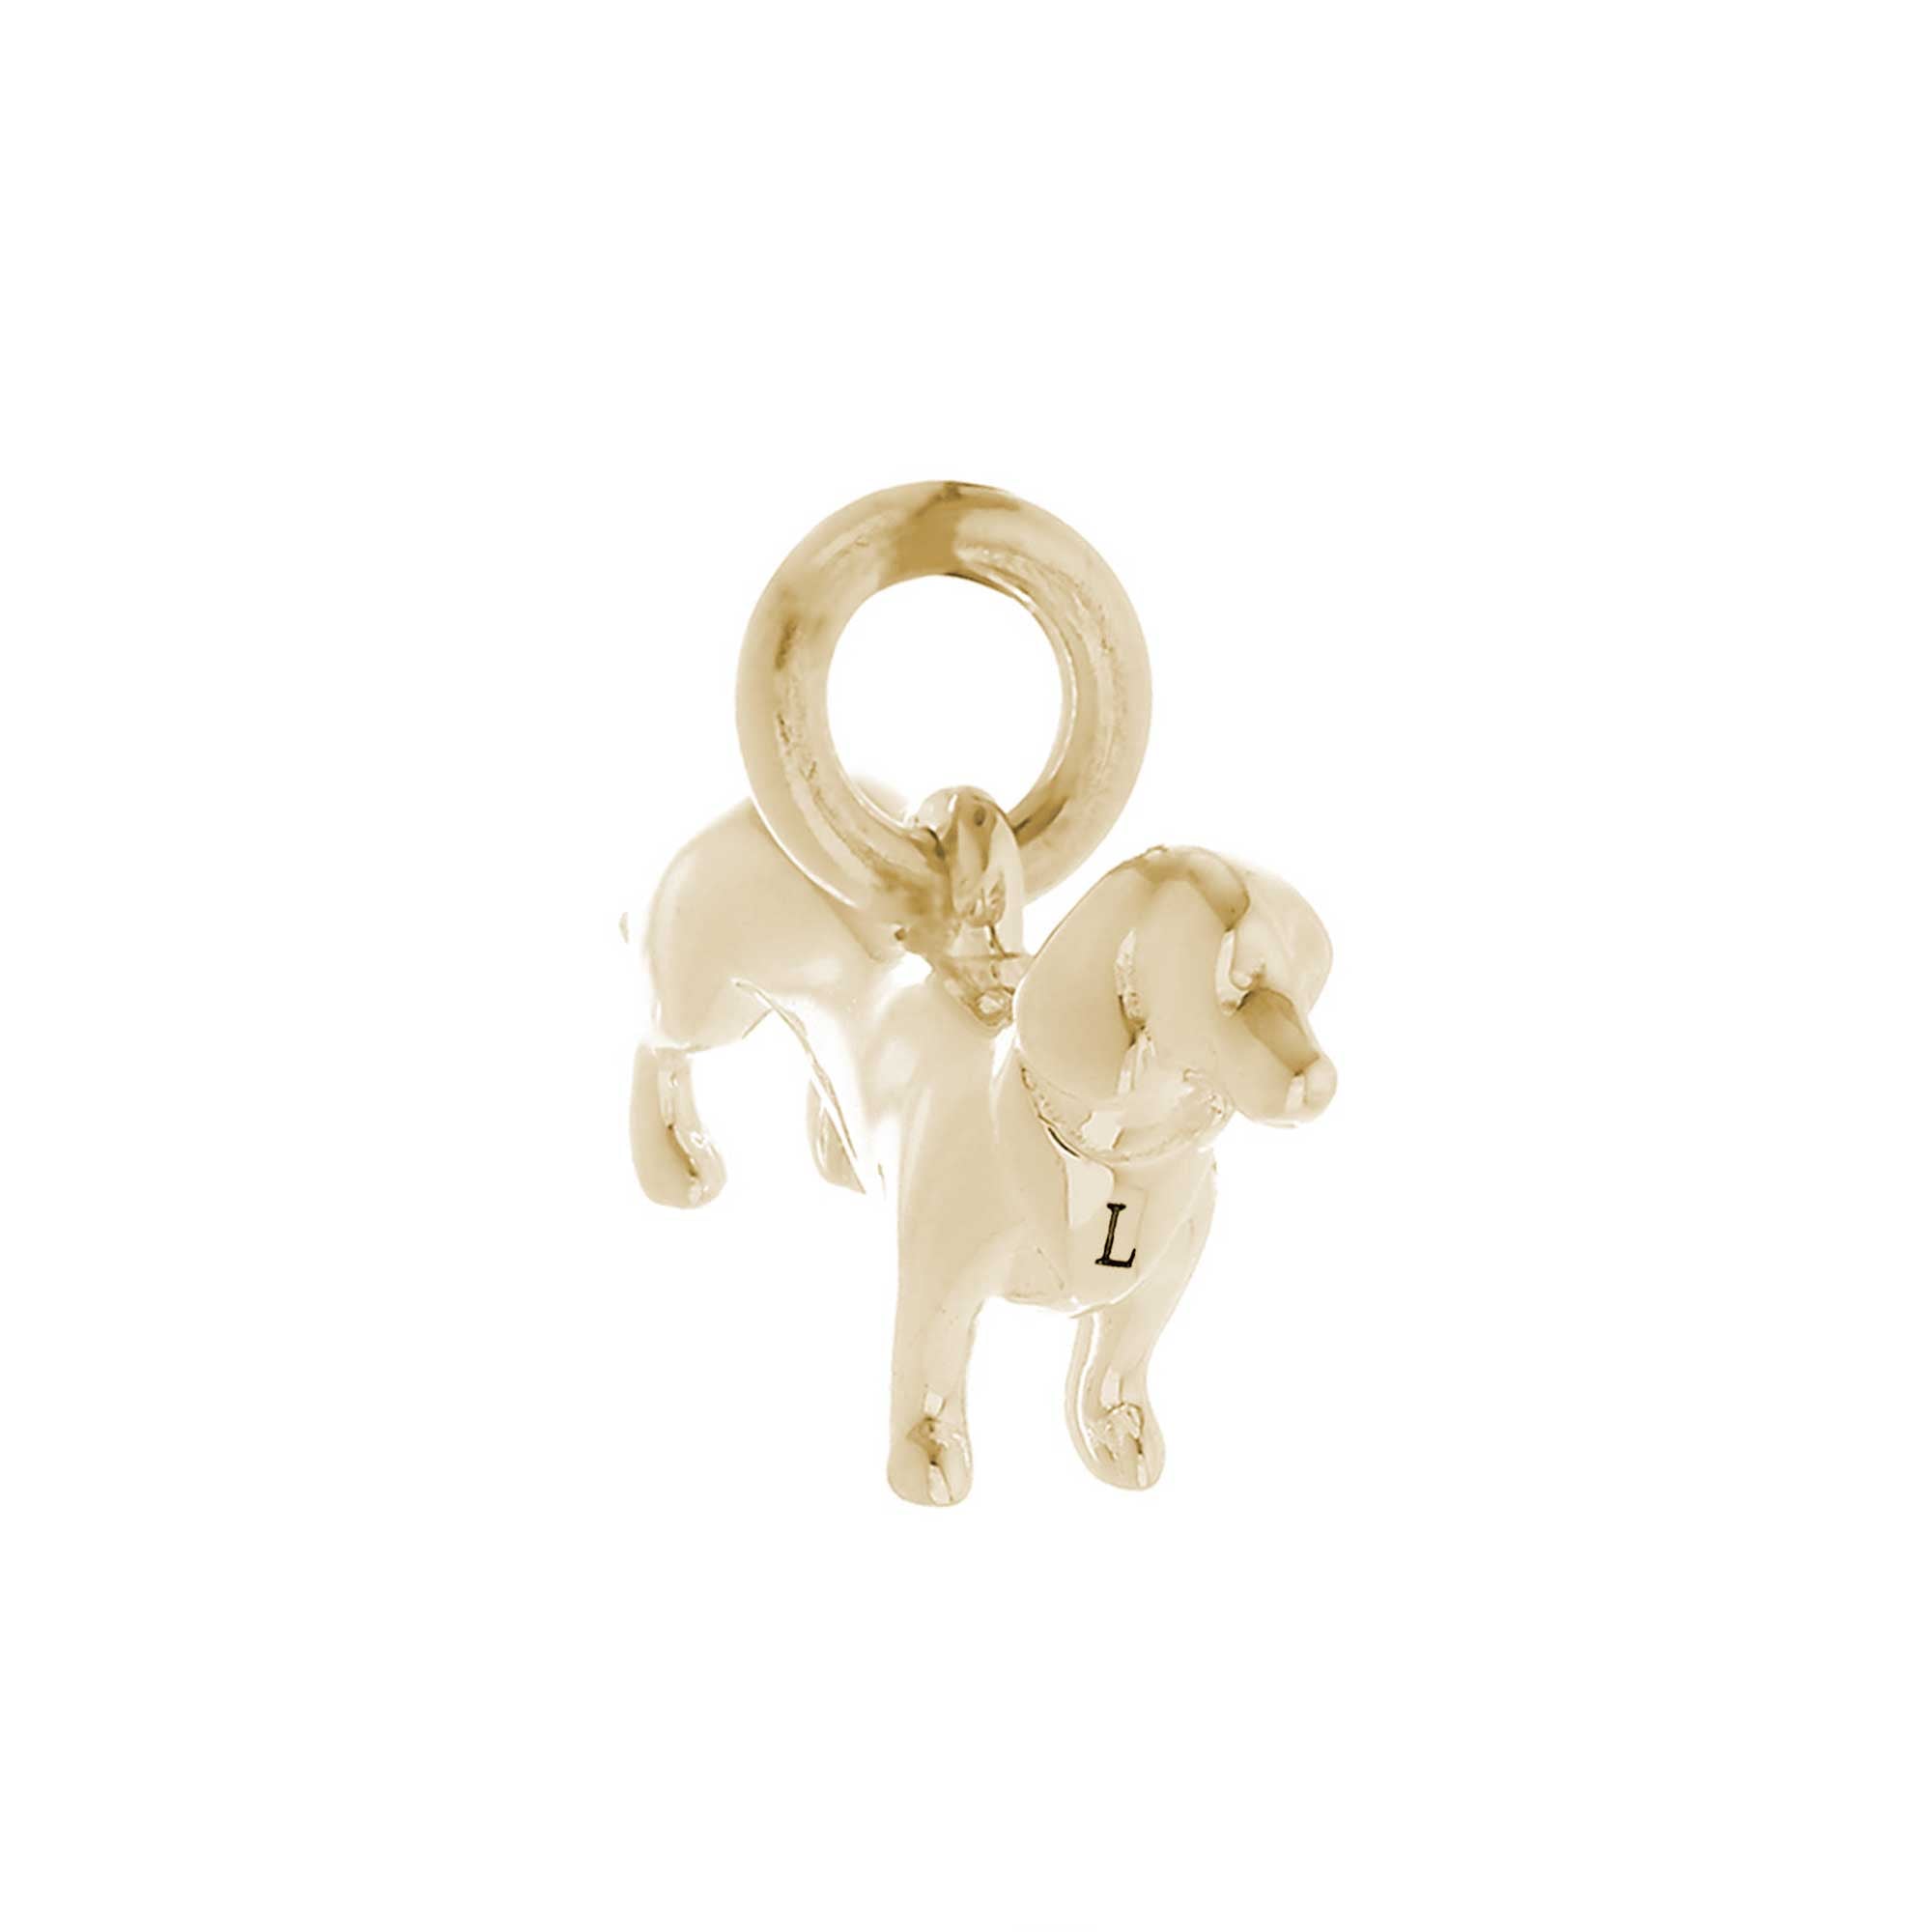 solid gold dachshund sausage dog charm 9k 9ct for bracelet fits links of london pandora style